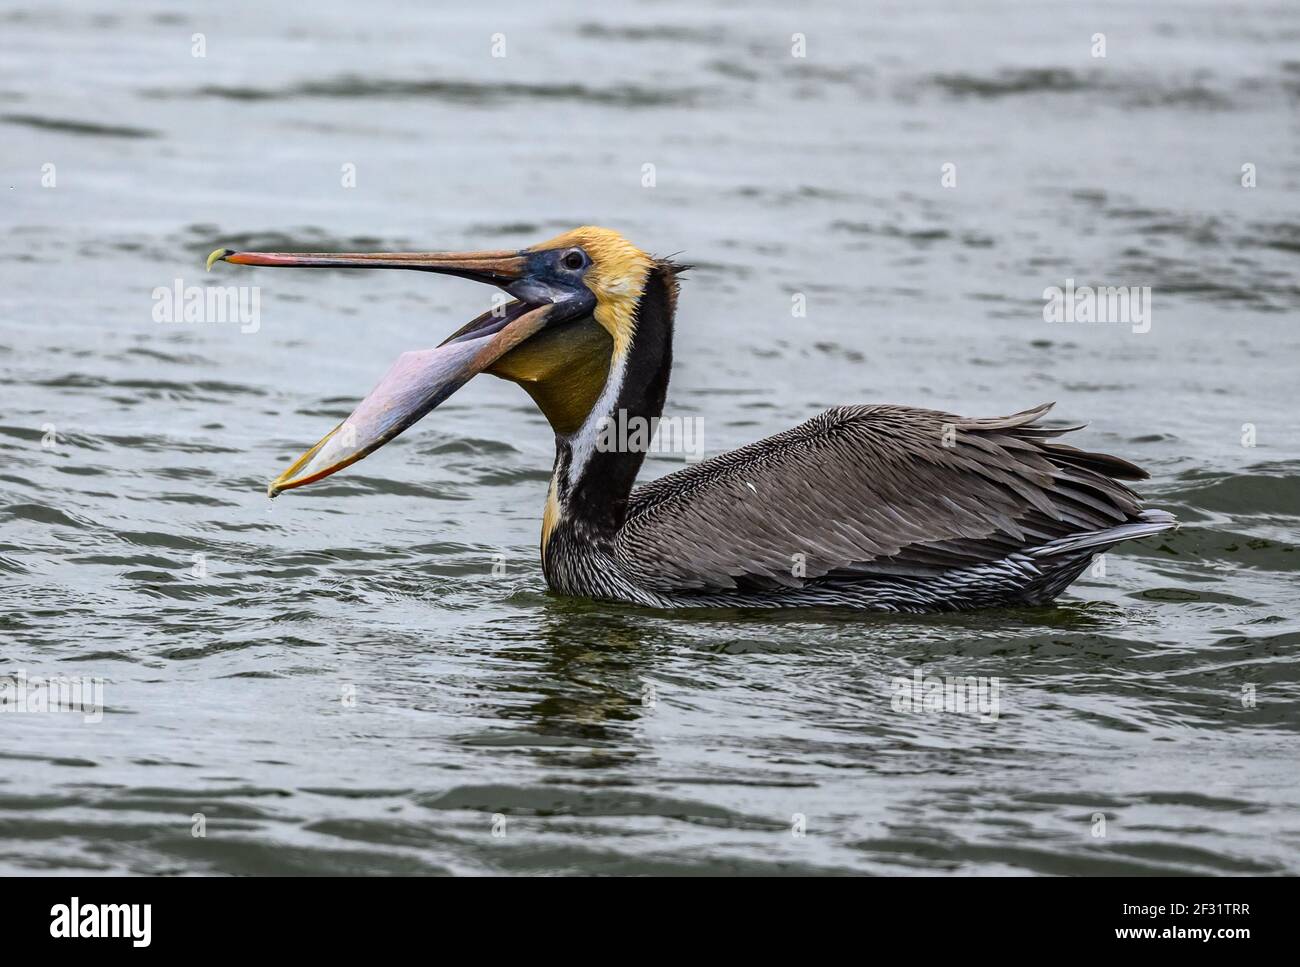 A Brown Pelican (Pelecanus occidentalis) with its giant mouth wide open. Houston, Texas, USA. Stock Photo